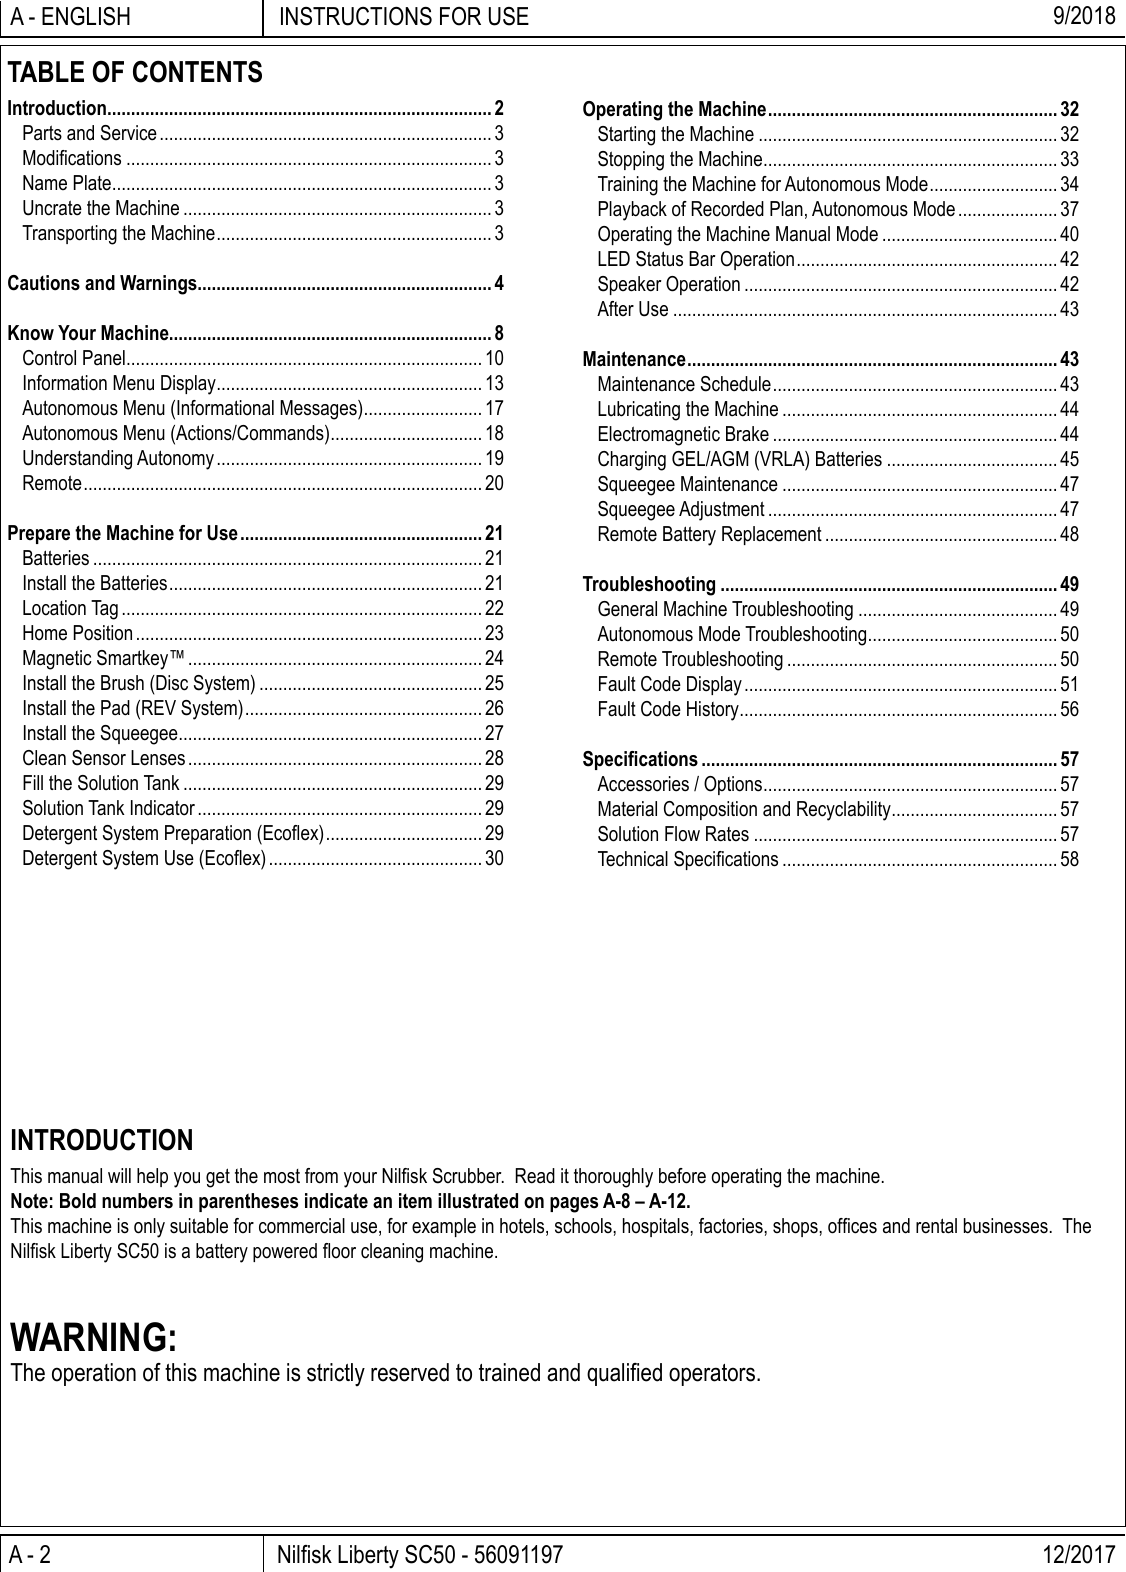 A - 2 Nilﬁ sk Liberty SC50 - 56091197 12/2017INSTRUCTIONS FOR USEA - ENGLISH 9/2018INTRODUCTIONThis manual will help you get the most from your Nilﬁ sk Scrubber.  Read it thoroughly before operating the machine.Note: Bold numbers in parentheses indicate an item illustrated on pages A-8 – A-12.This machine is only suitable for commercial use, for example in hotels, schools, hospitals, factories, shops, ofﬁ ces and rental businesses.  The Nilﬁ sk Liberty SC50 is a battery powered ﬂ oor cleaning machine.WARNING:The operation of this machine is strictly reserved to trained and qualiﬁ ed operators.TABLE OF CONTENTSIntroduction ................................................................................. 2Parts and Service ...................................................................... 3Modiﬁ cations ............................................................................. 3Name Plate ................................................................................ 3Uncrate the Machine ................................................................. 3Transporting the Machine .......................................................... 3Cautions and Warnings.............................................................. 4Know Your Machine.................................................................... 8Control Panel ........................................................................... 10Information Menu Display ........................................................ 13Autonomous Menu (Informational Messages) ......................... 17Autonomous Menu (Actions/Commands) ................................ 18Understanding Autonomy ........................................................ 19Remote .................................................................................... 20Prepare the Machine for Use ................................................... 21Batteries .................................................................................. 21Install the Batteries .................................................................. 21Location Tag ............................................................................ 22Home Position ......................................................................... 23Magnetic Smartkey™ .............................................................. 24Install the Brush (Disc System) ............................................... 25Install the Pad (REV System) .................................................. 26Install the Squeegee ................................................................ 27Clean Sensor Lenses .............................................................. 28Fill the Solution Tank ............................................................... 29Solution Tank Indicator ............................................................ 29Detergent System Preparation (Ecoﬂ ex) ................................. 29Detergent System Use (Ecoﬂ ex) ............................................. 30Operating the Machine ............................................................. 32Starting the Machine ............................................................... 32Stopping the Machine .............................................................. 33Training the Machine for Autonomous Mode ........................... 34Playback of Recorded Plan, Autonomous Mode ..................... 37Operating the Machine Manual Mode ..................................... 40LED Status Bar Operation ....................................................... 42Speaker Operation .................................................................. 42After Use ................................................................................. 43Maintenance .............................................................................. 43Maintenance Schedule ............................................................ 43Lubricating the Machine .......................................................... 44Electromagnetic Brake ............................................................ 44Charging GEL/AGM (VRLA) Batteries .................................... 45Squeegee Maintenance .......................................................... 47Squeegee Adjustment ............................................................. 47Remote Battery Replacement ................................................. 48Troubleshooting ....................................................................... 49General Machine Troubleshooting ..........................................49Autonomous Mode Troubleshooting ........................................ 50Remote Troubleshooting ......................................................... 50Fault Code Display .................................................................. 51Fault Code History ................................................................... 56Speciﬁ cations ........................................................................... 57Accessories / Options .............................................................. 57Material Composition and Recyclability ................................... 57Solution Flow Rates ................................................................ 57Technical Speciﬁ cations .......................................................... 58